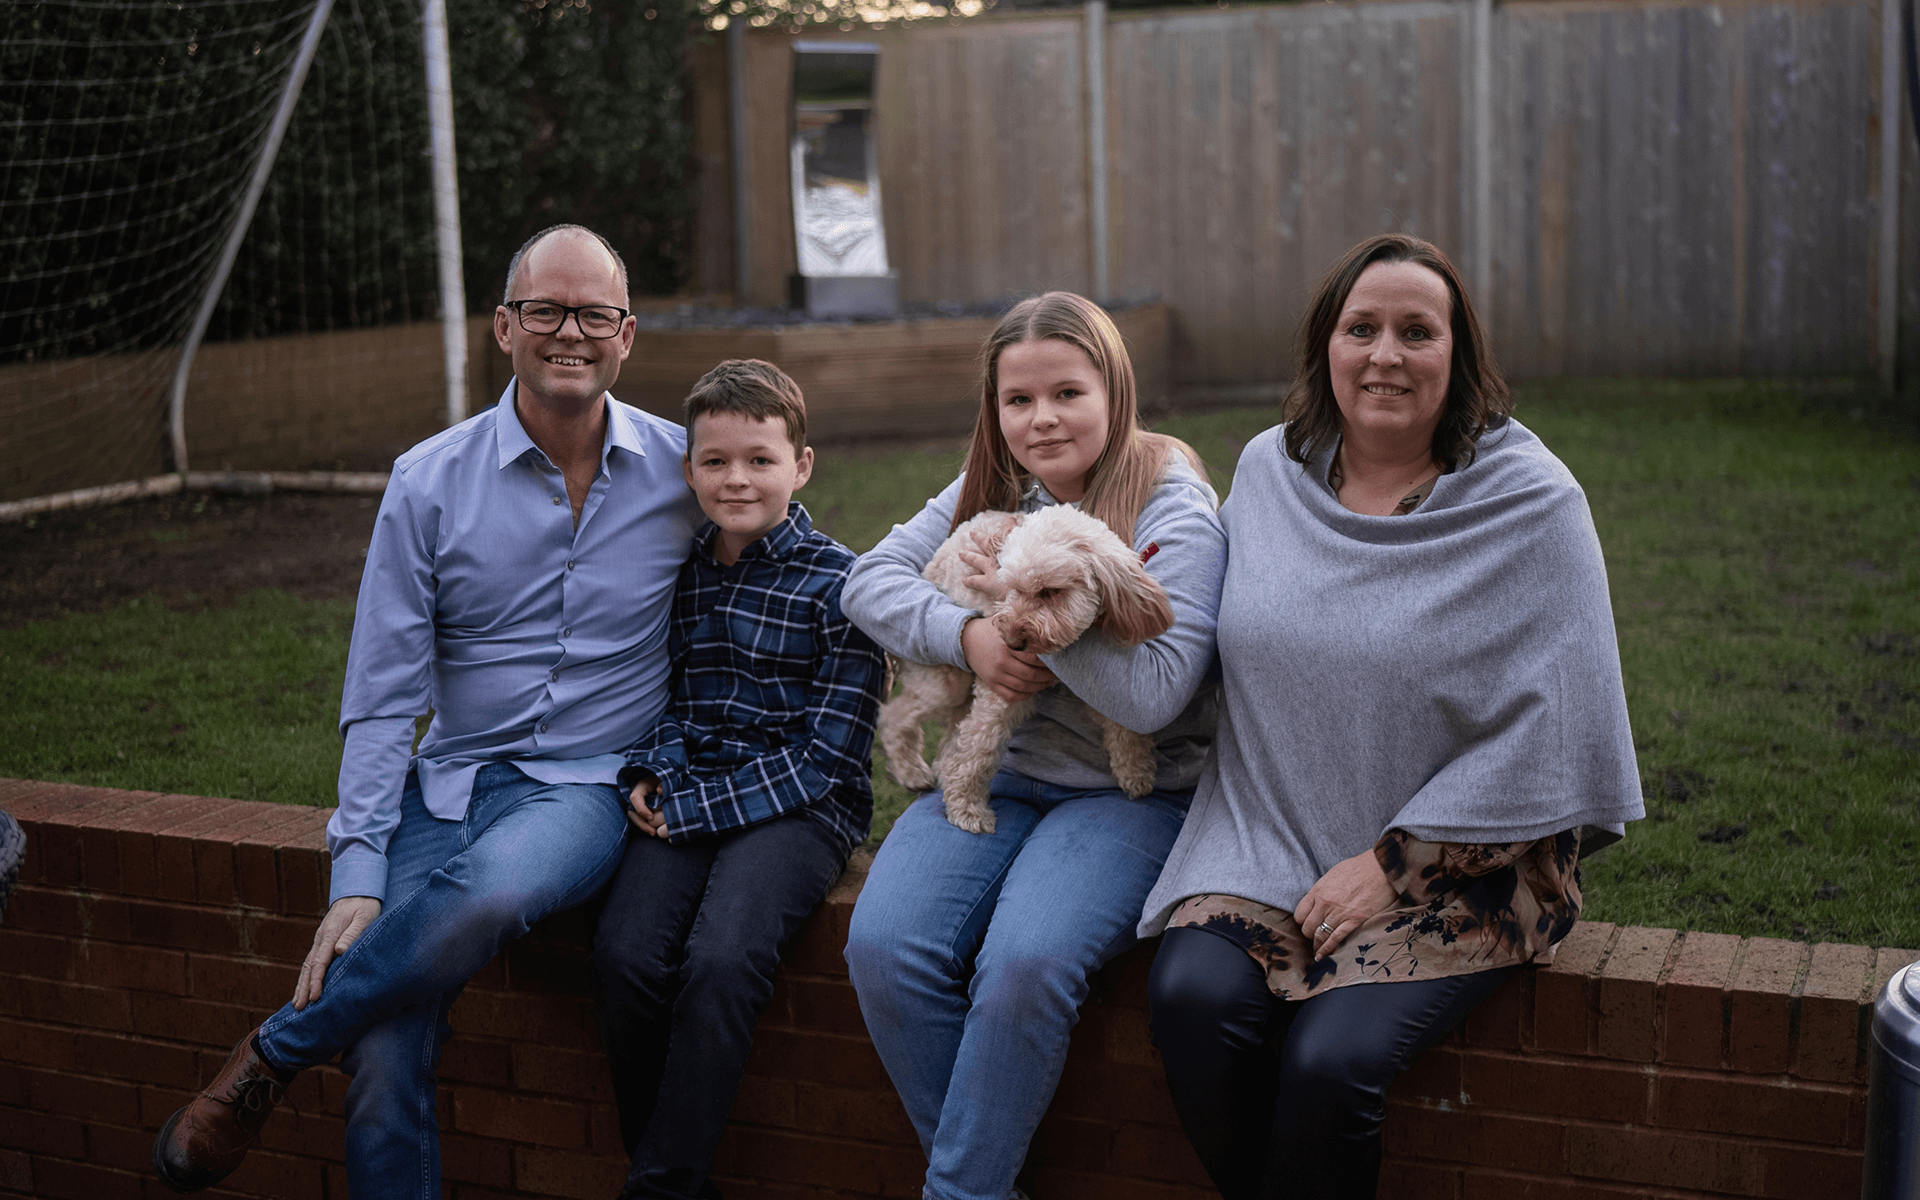 Triumph Over Adversity - The Chatting Family